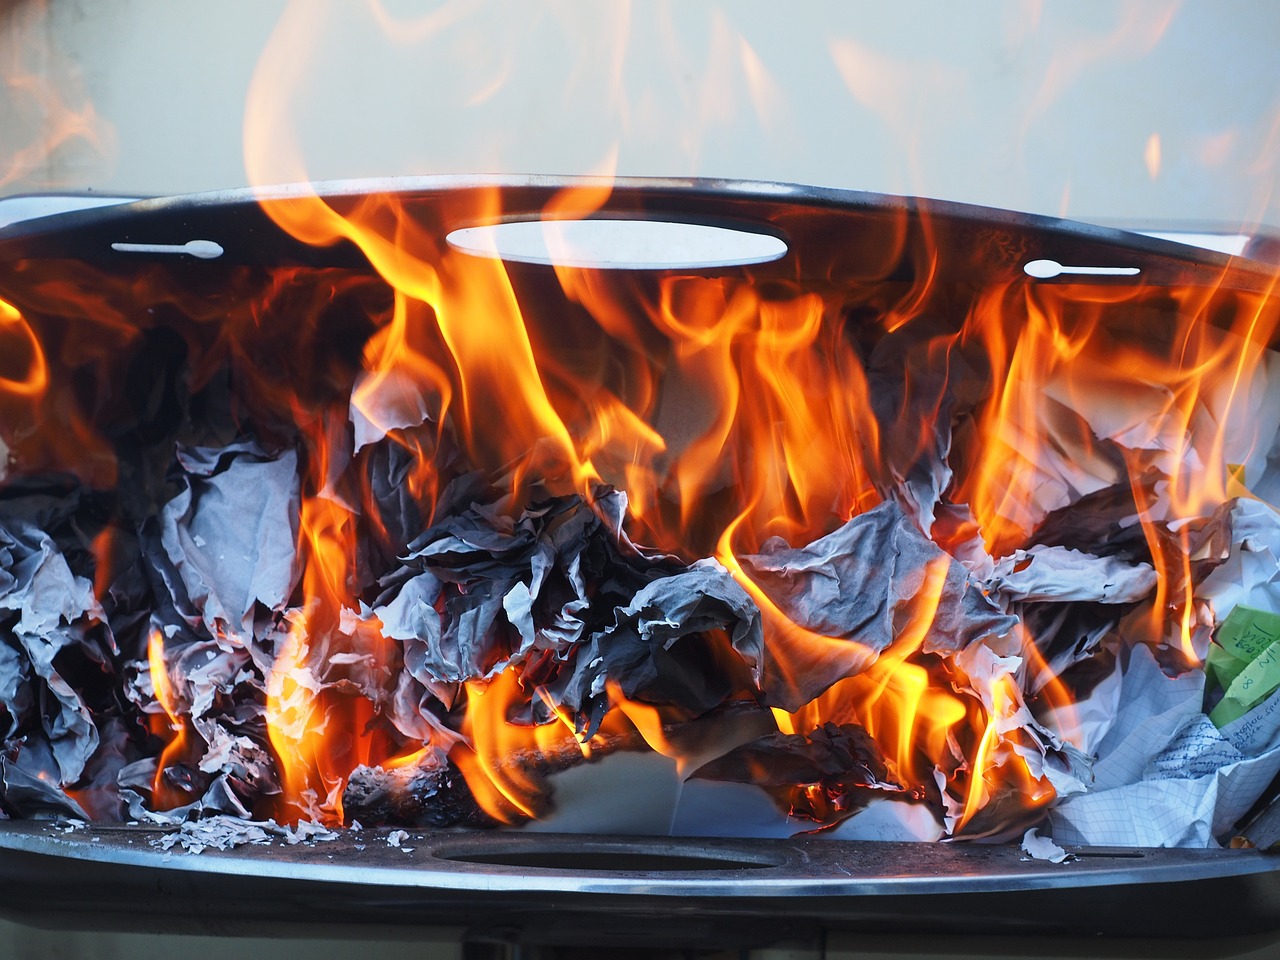 a close up of a grill with flames coming out of it, a picture, by Rodney Joseph Burn, shutterstock, fine art, burnt paper, molten plastic, on display, awkward situation